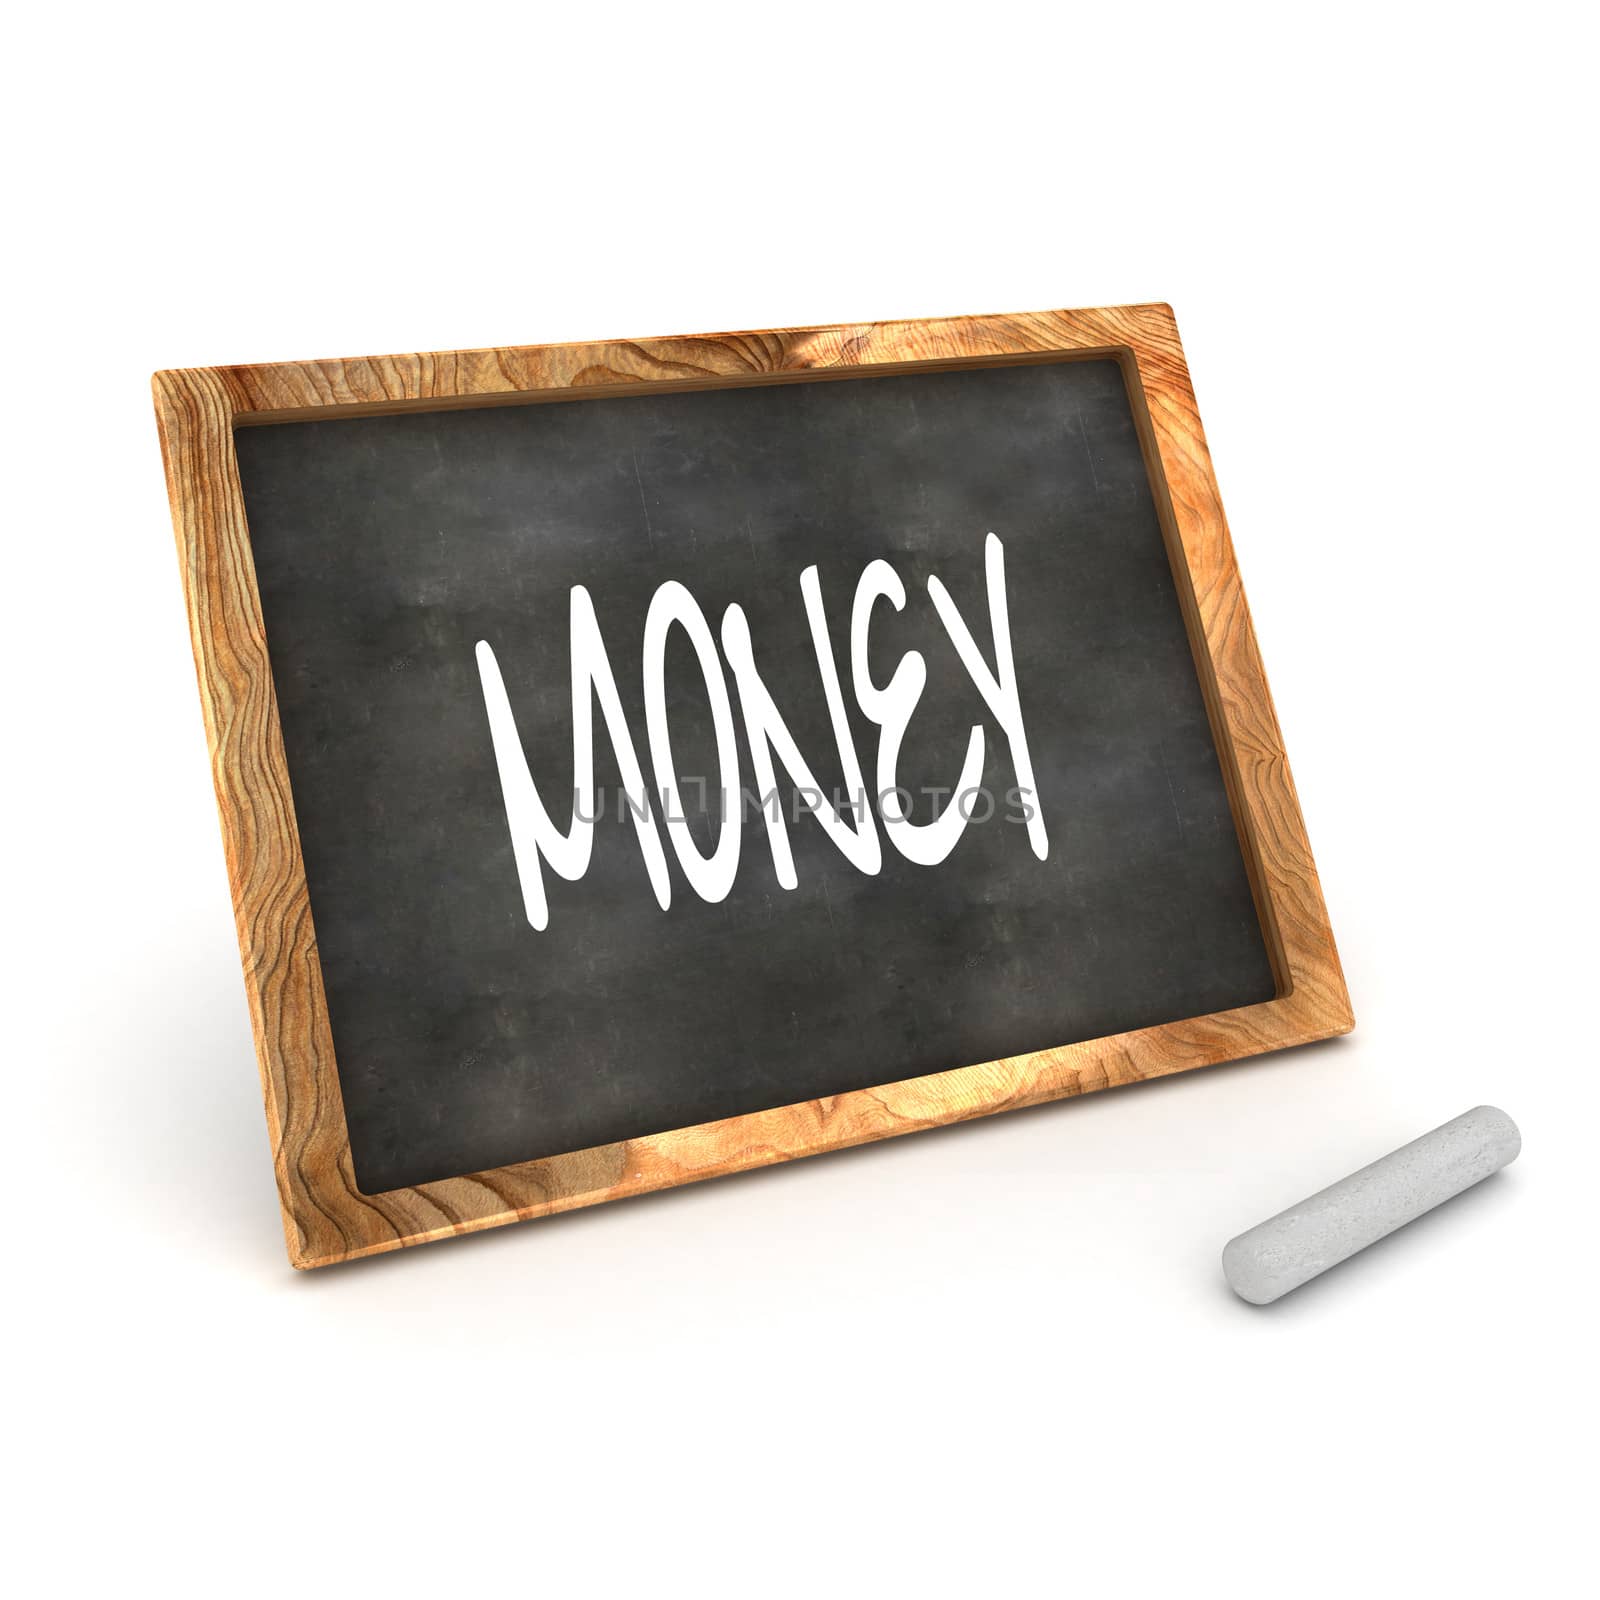 A Colourful 3d Rendered Blackboard Concept Illustration, showing the word "Money"